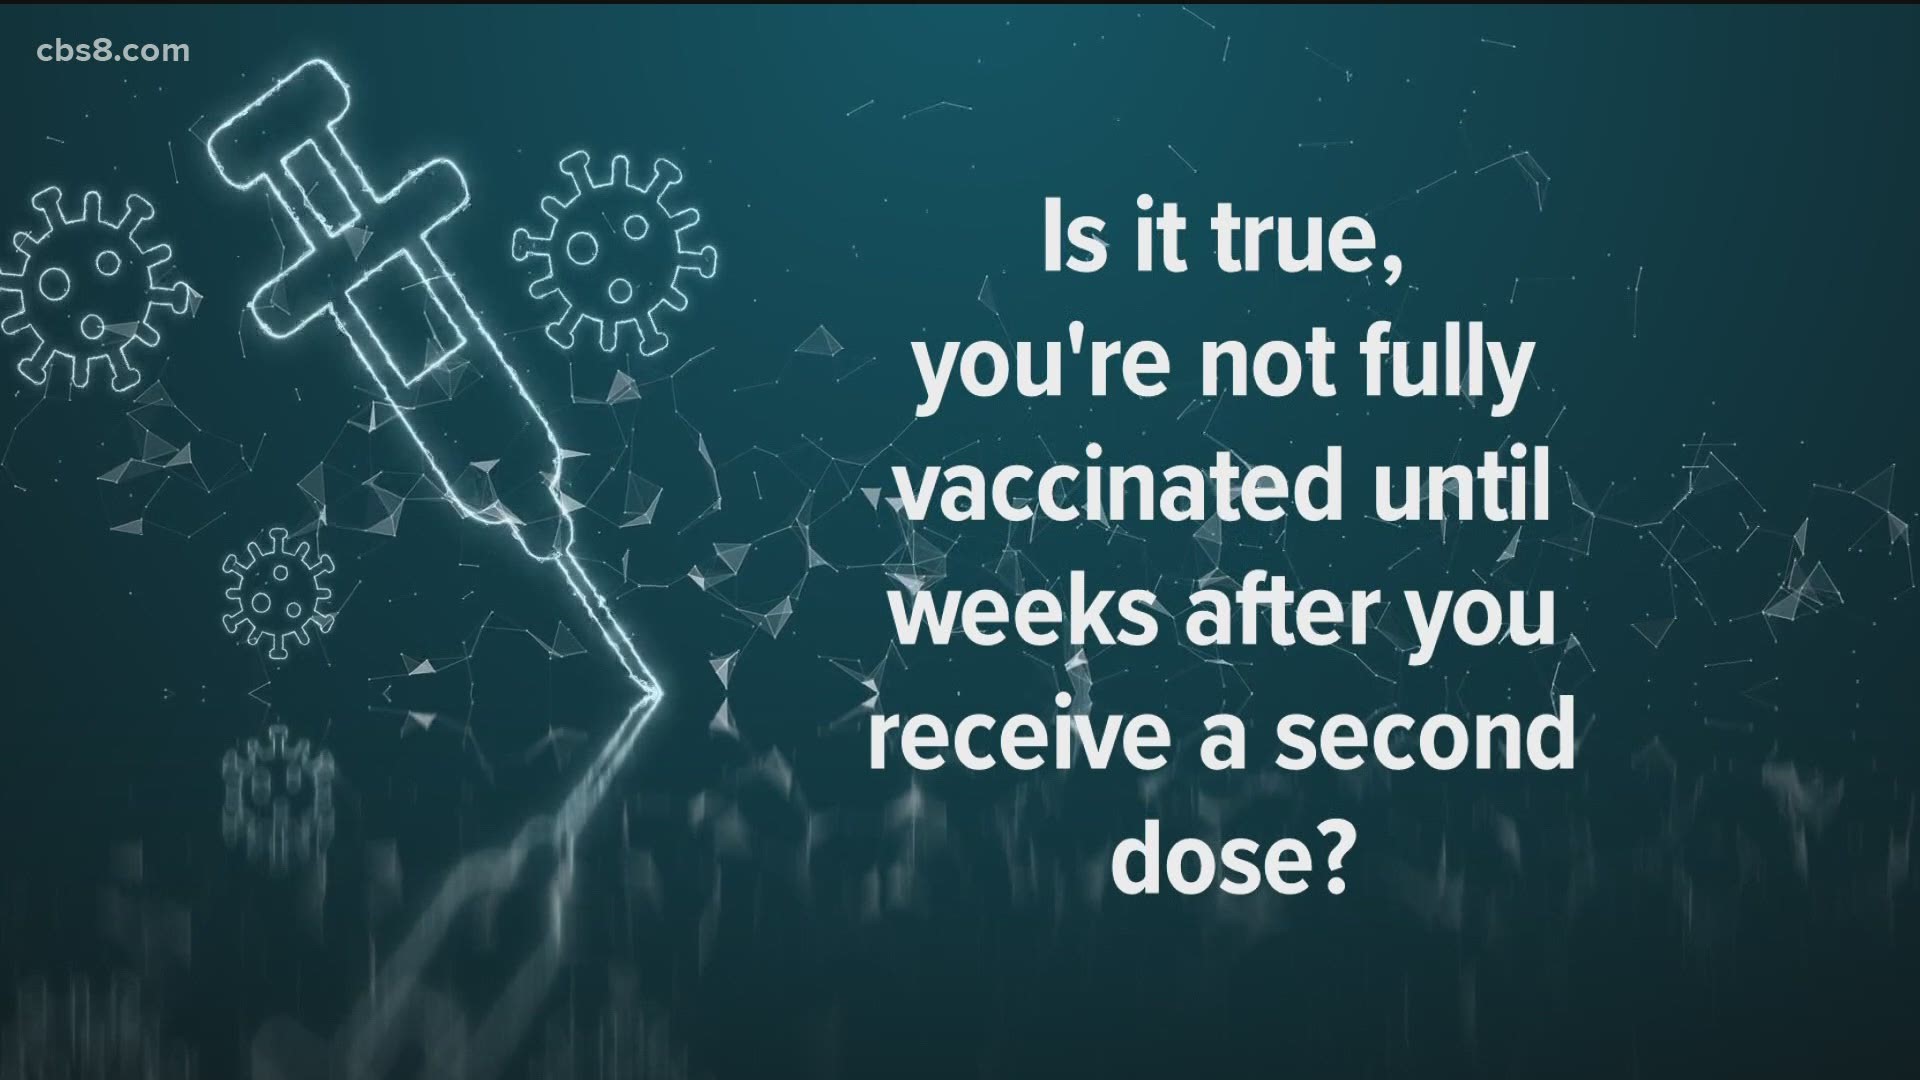 As myths and rumors spread about the vaccine we work to verify the truths and answer your questions.